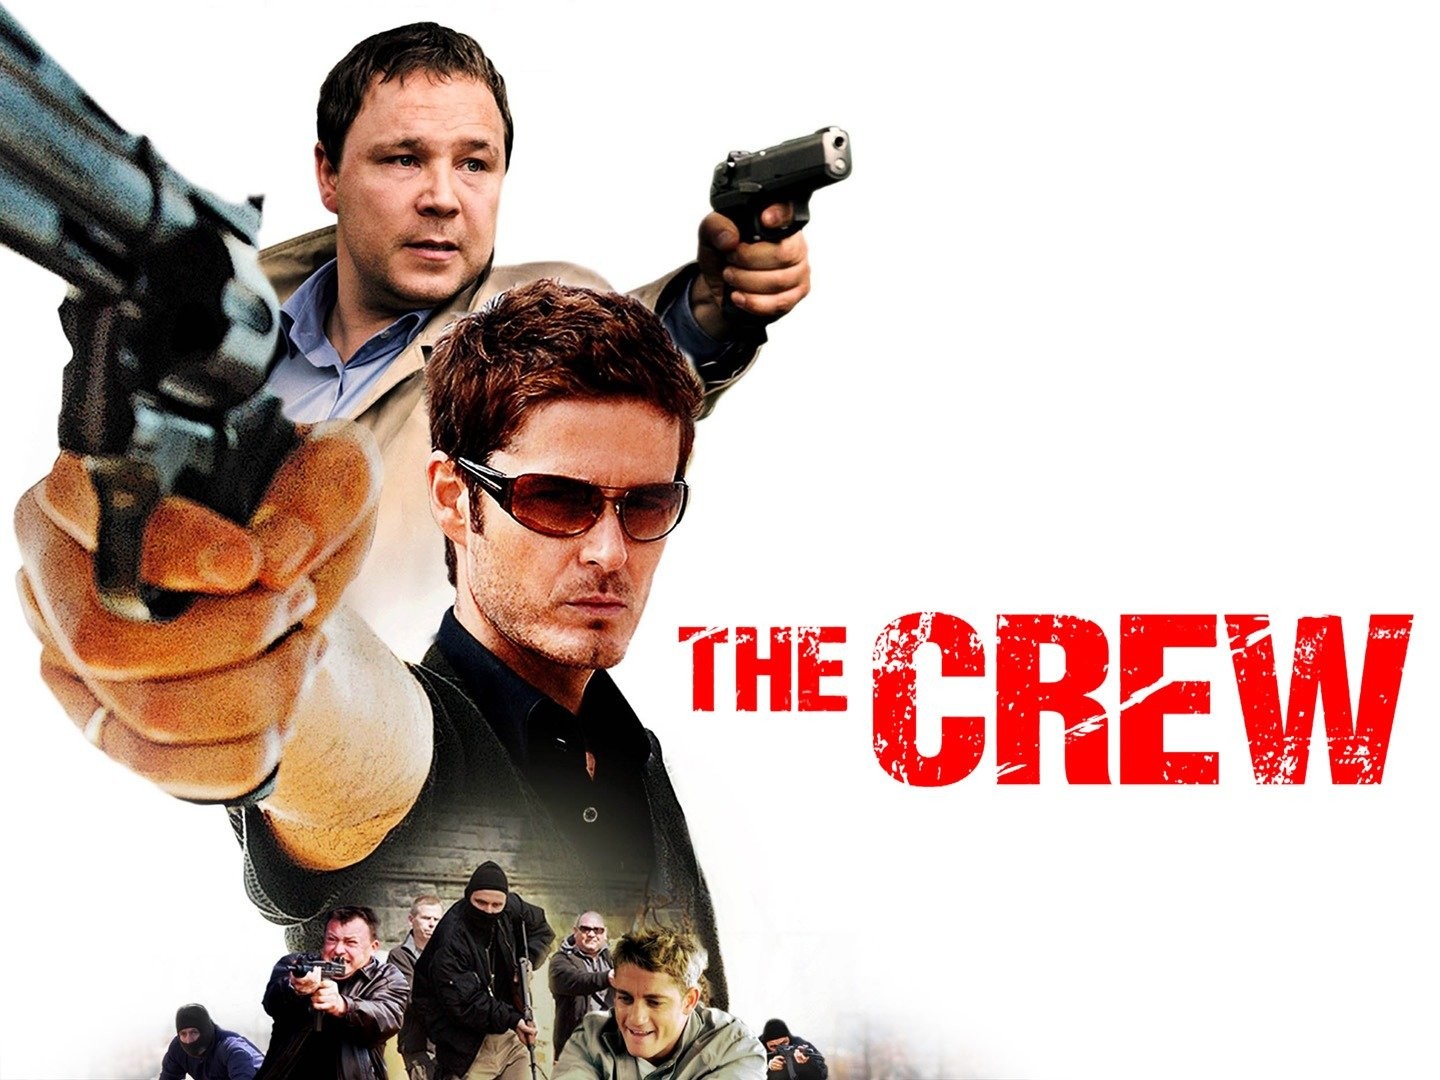 The Crew - Rotten Tomatoes